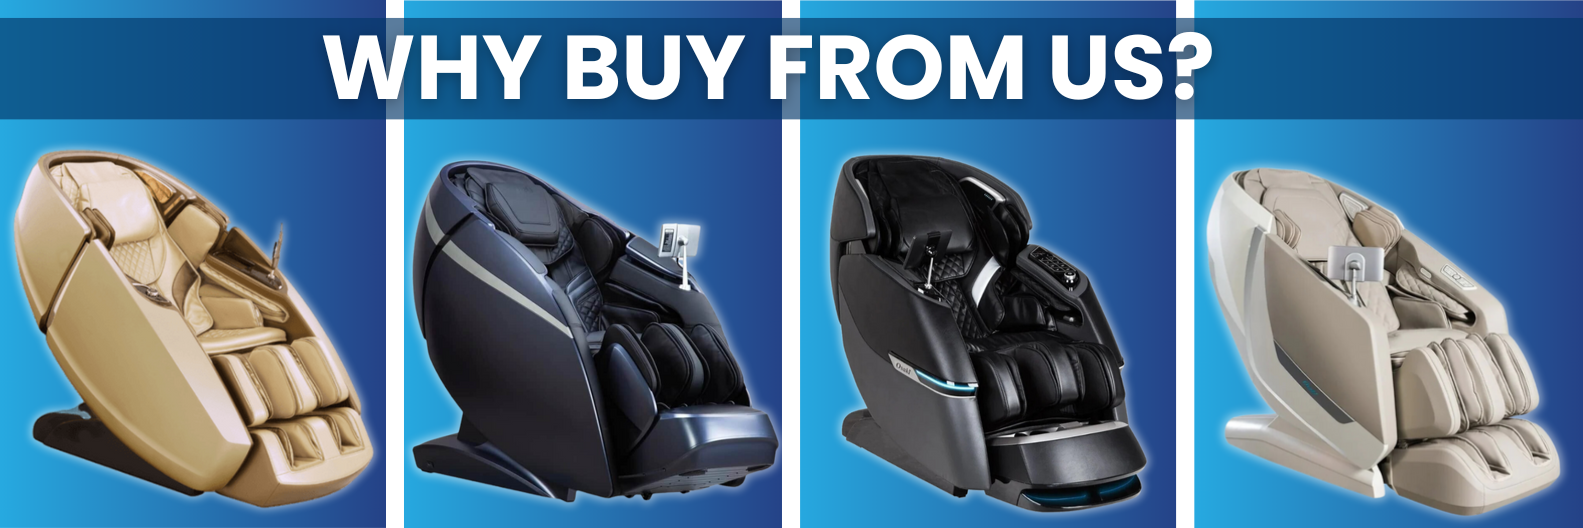 The Modern Back has the largest selection of top-quality massage chairs, zero gravity recliners, lift chairs, and smart number beds. 